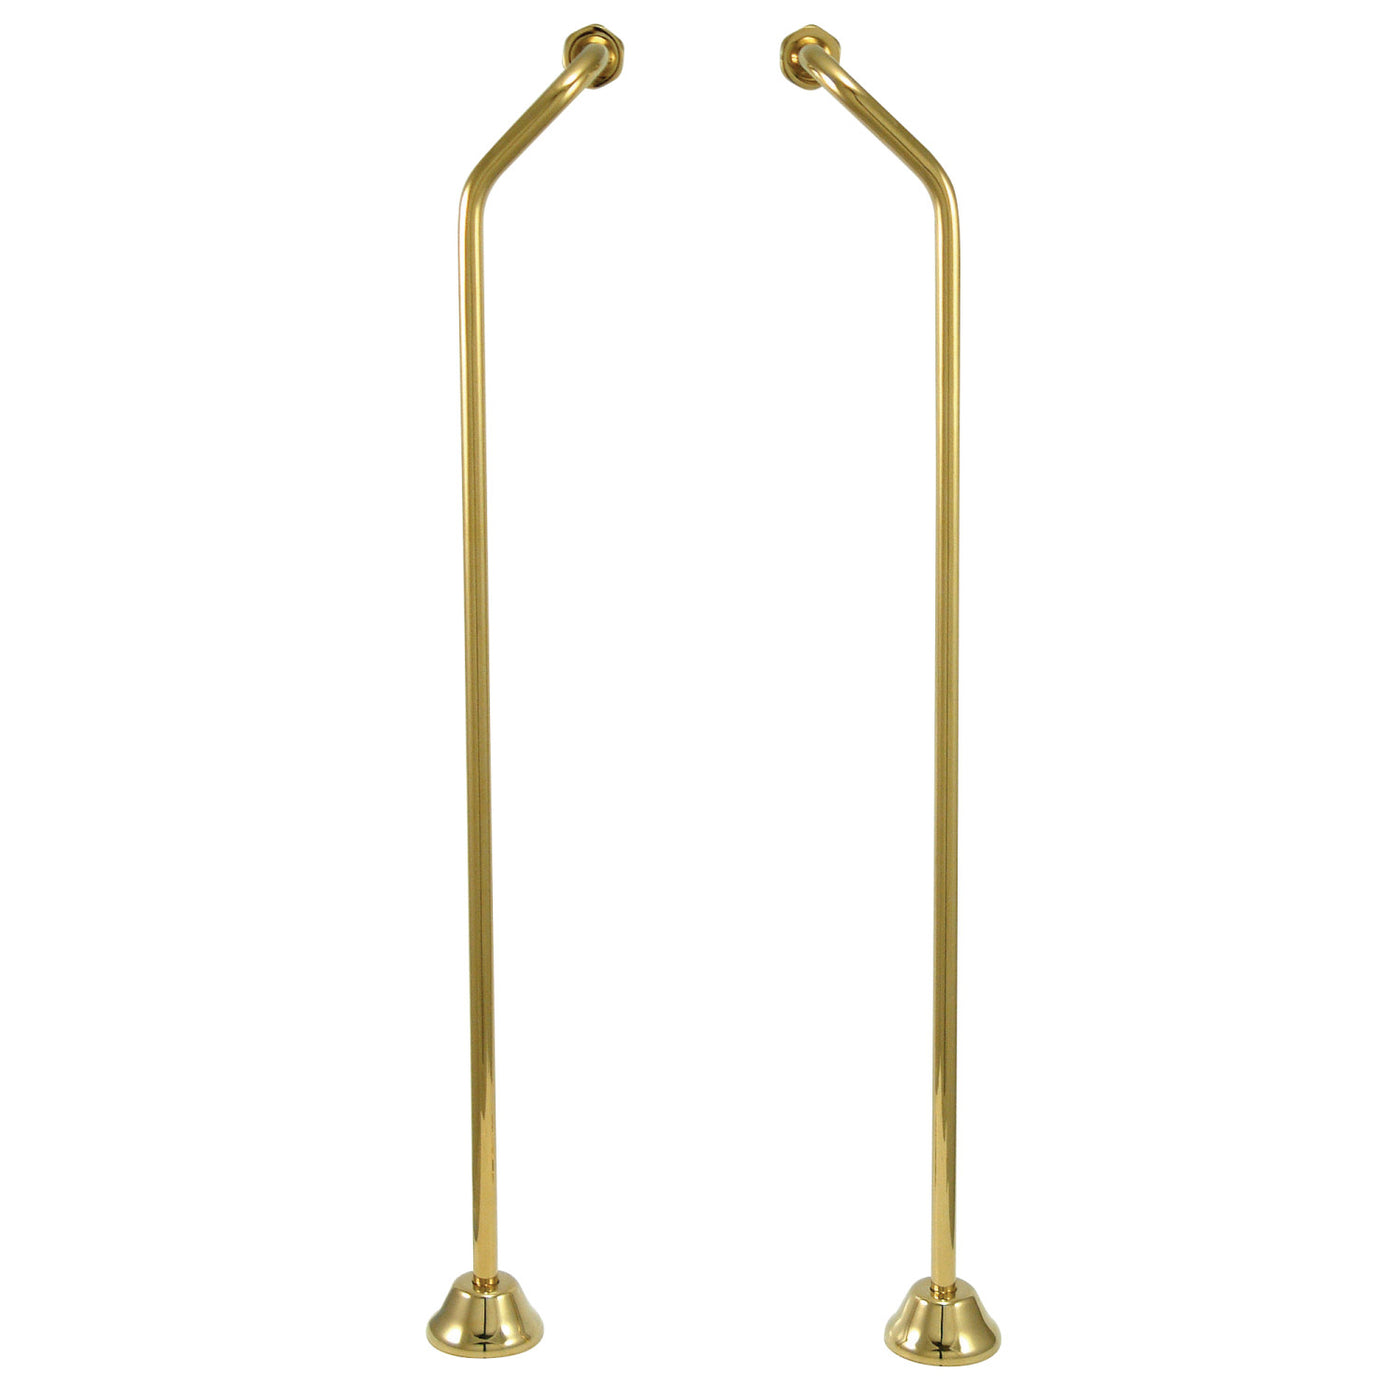 Elements of Design DS472 Double Offset Bath Supply, Polished Brass